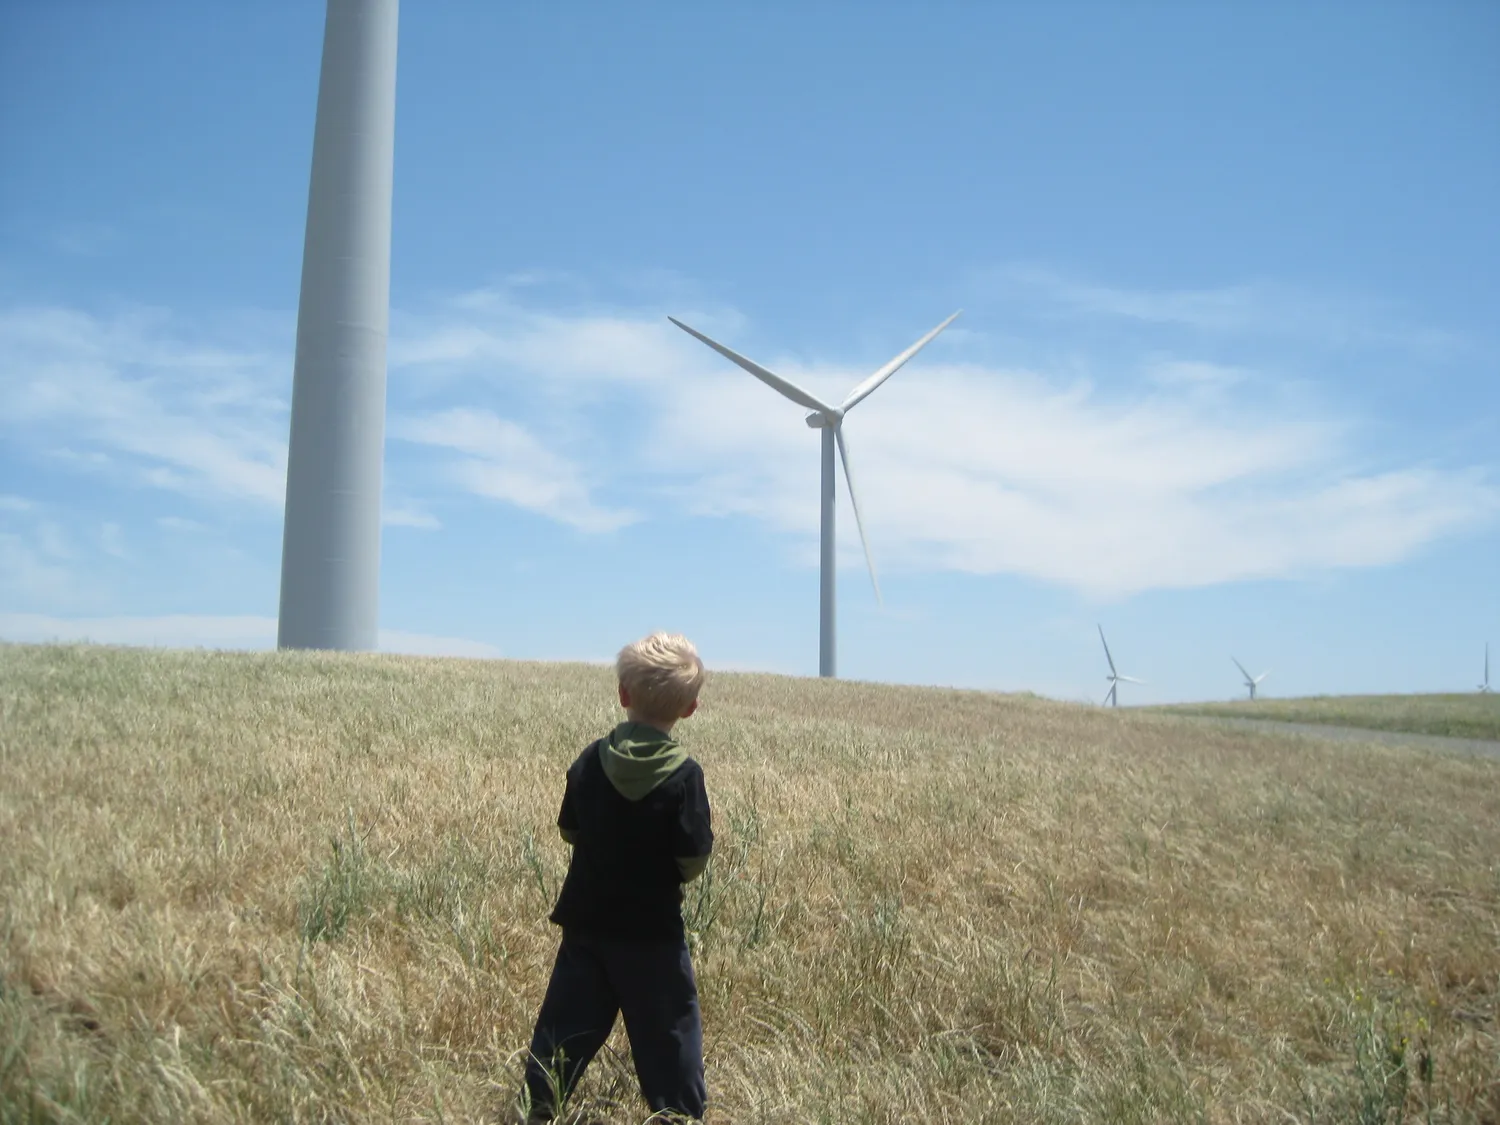 A blond boy standing in a field with wind turbines in the background